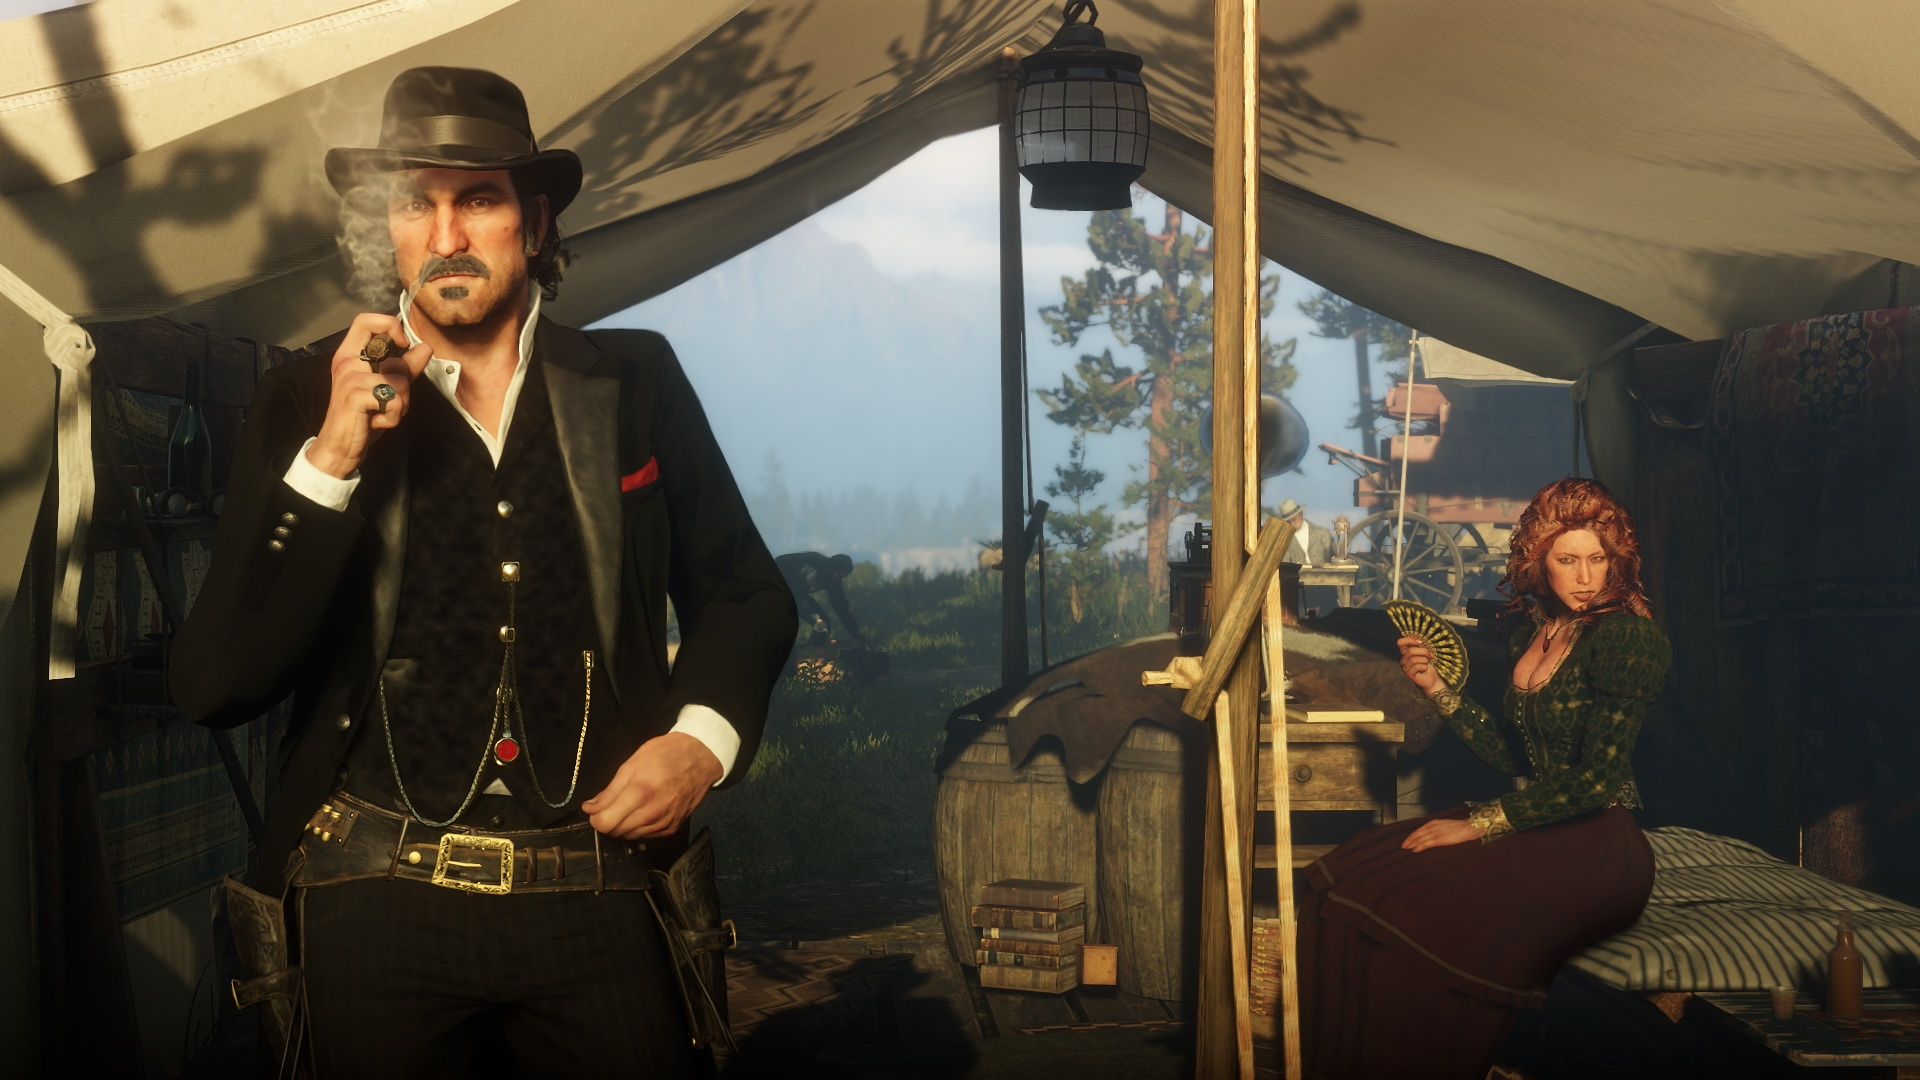 Red Dead Redemption 2 (for PlayStation 4) Review